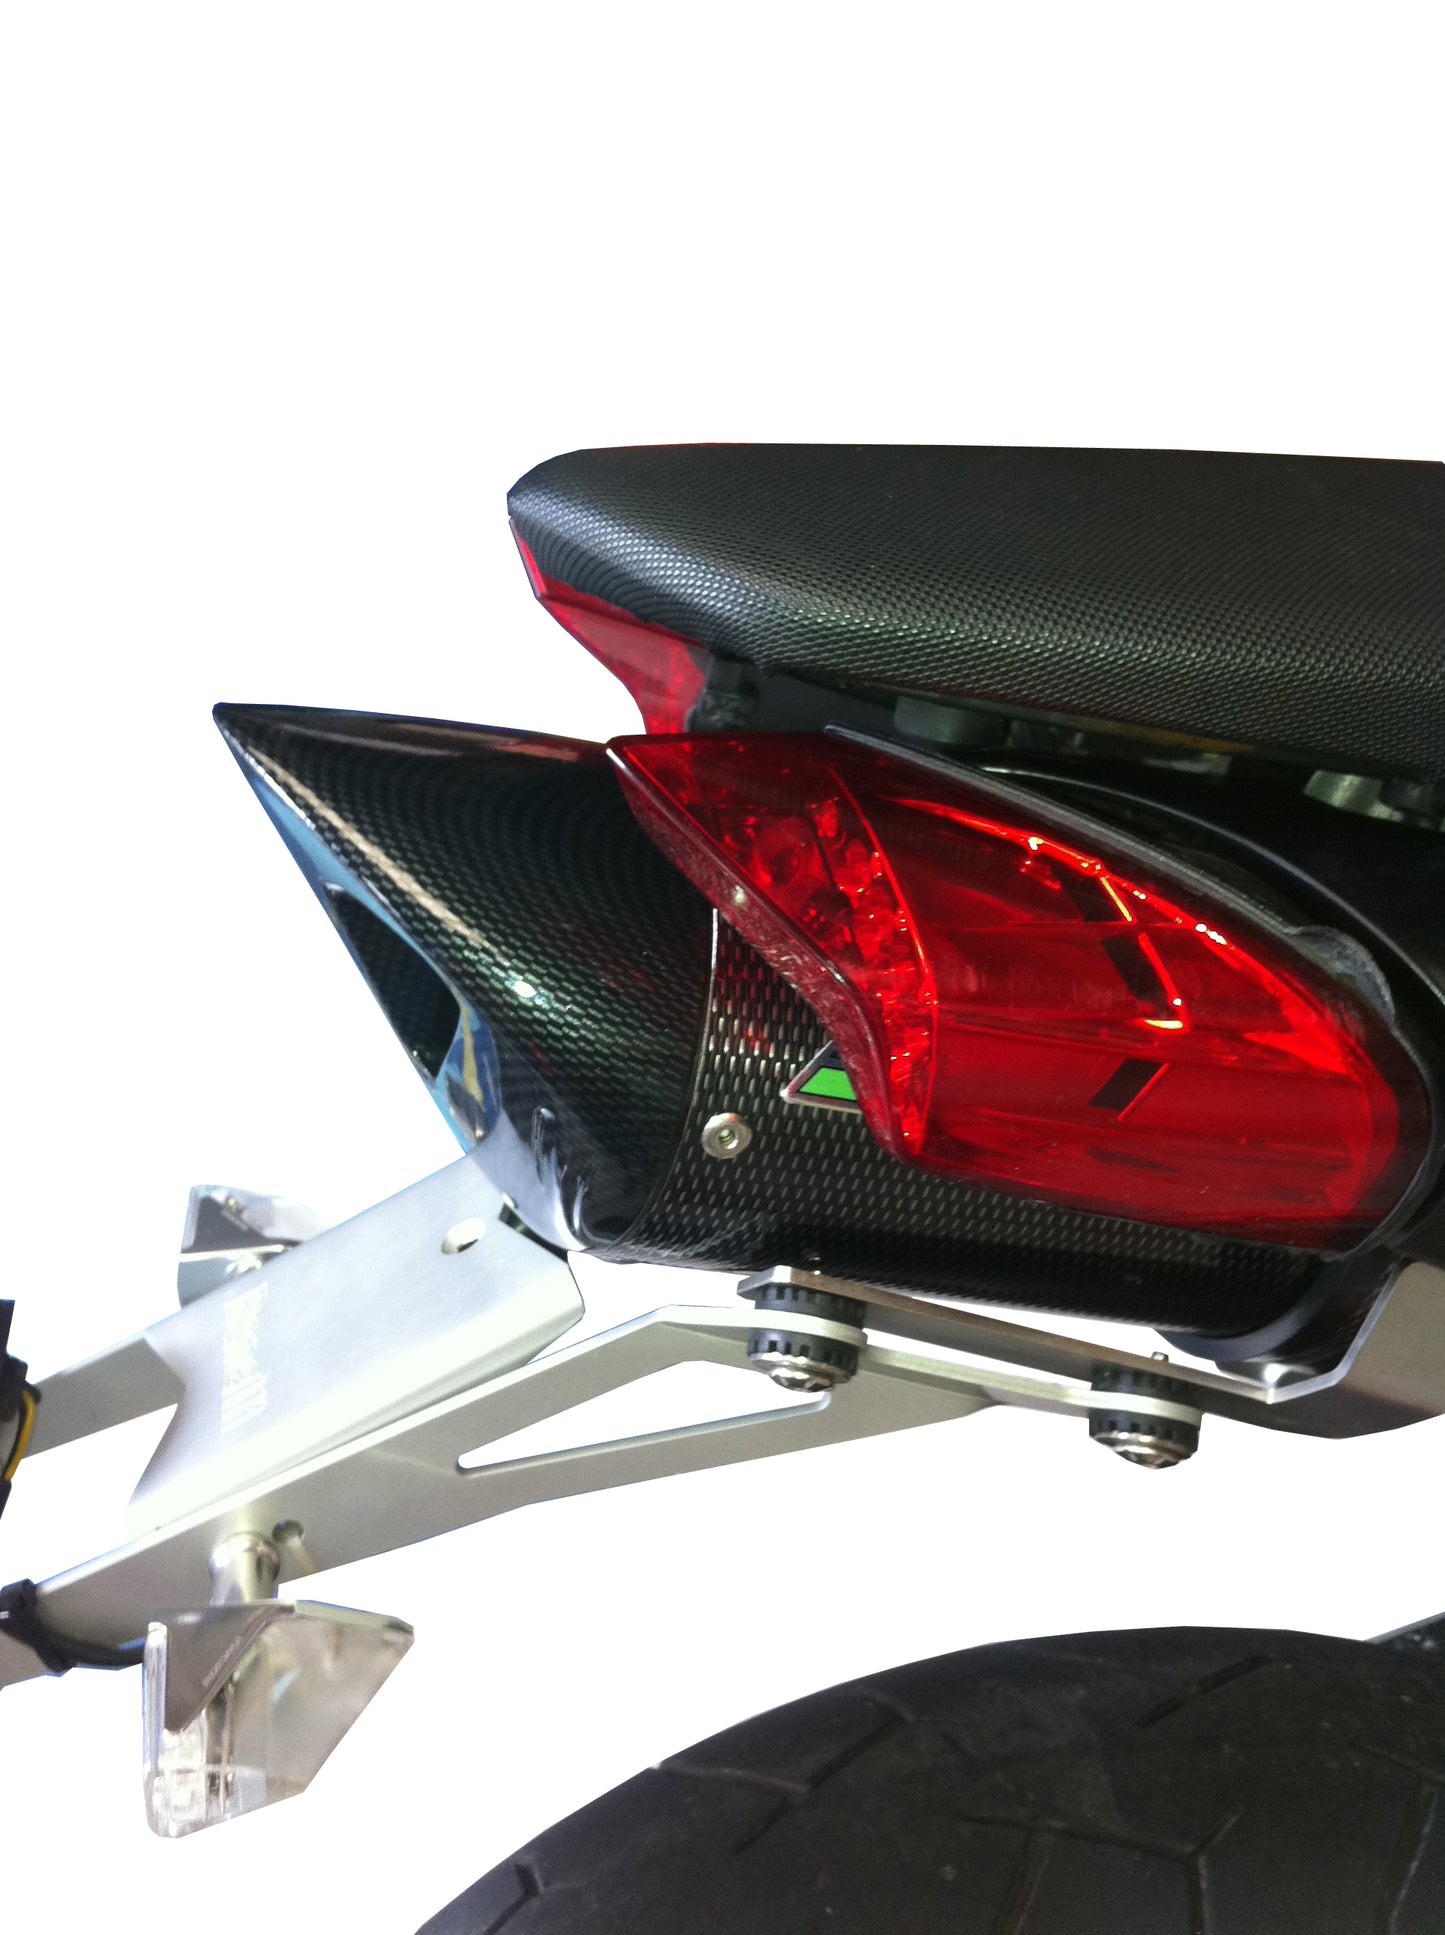 GPR Exhaust for Benelli Tnt 1130 2008-2016, Tiburon Poppy, Slip-on Exhaust Including Removable DB Killer and Link Pipe